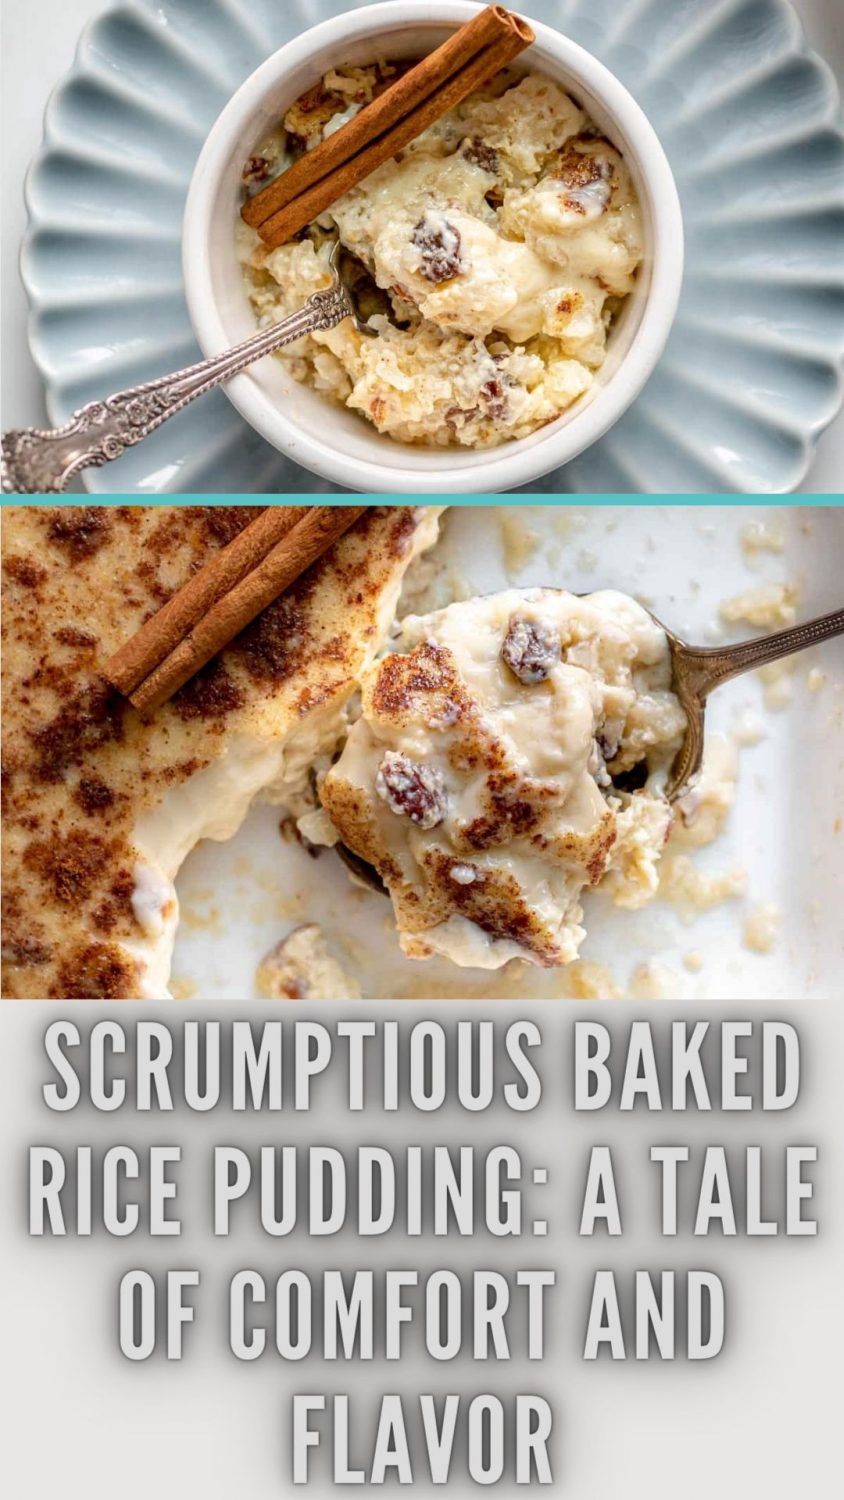 Scrumptious Baked Rice Pudding: A Tale of Comfort and Flavor